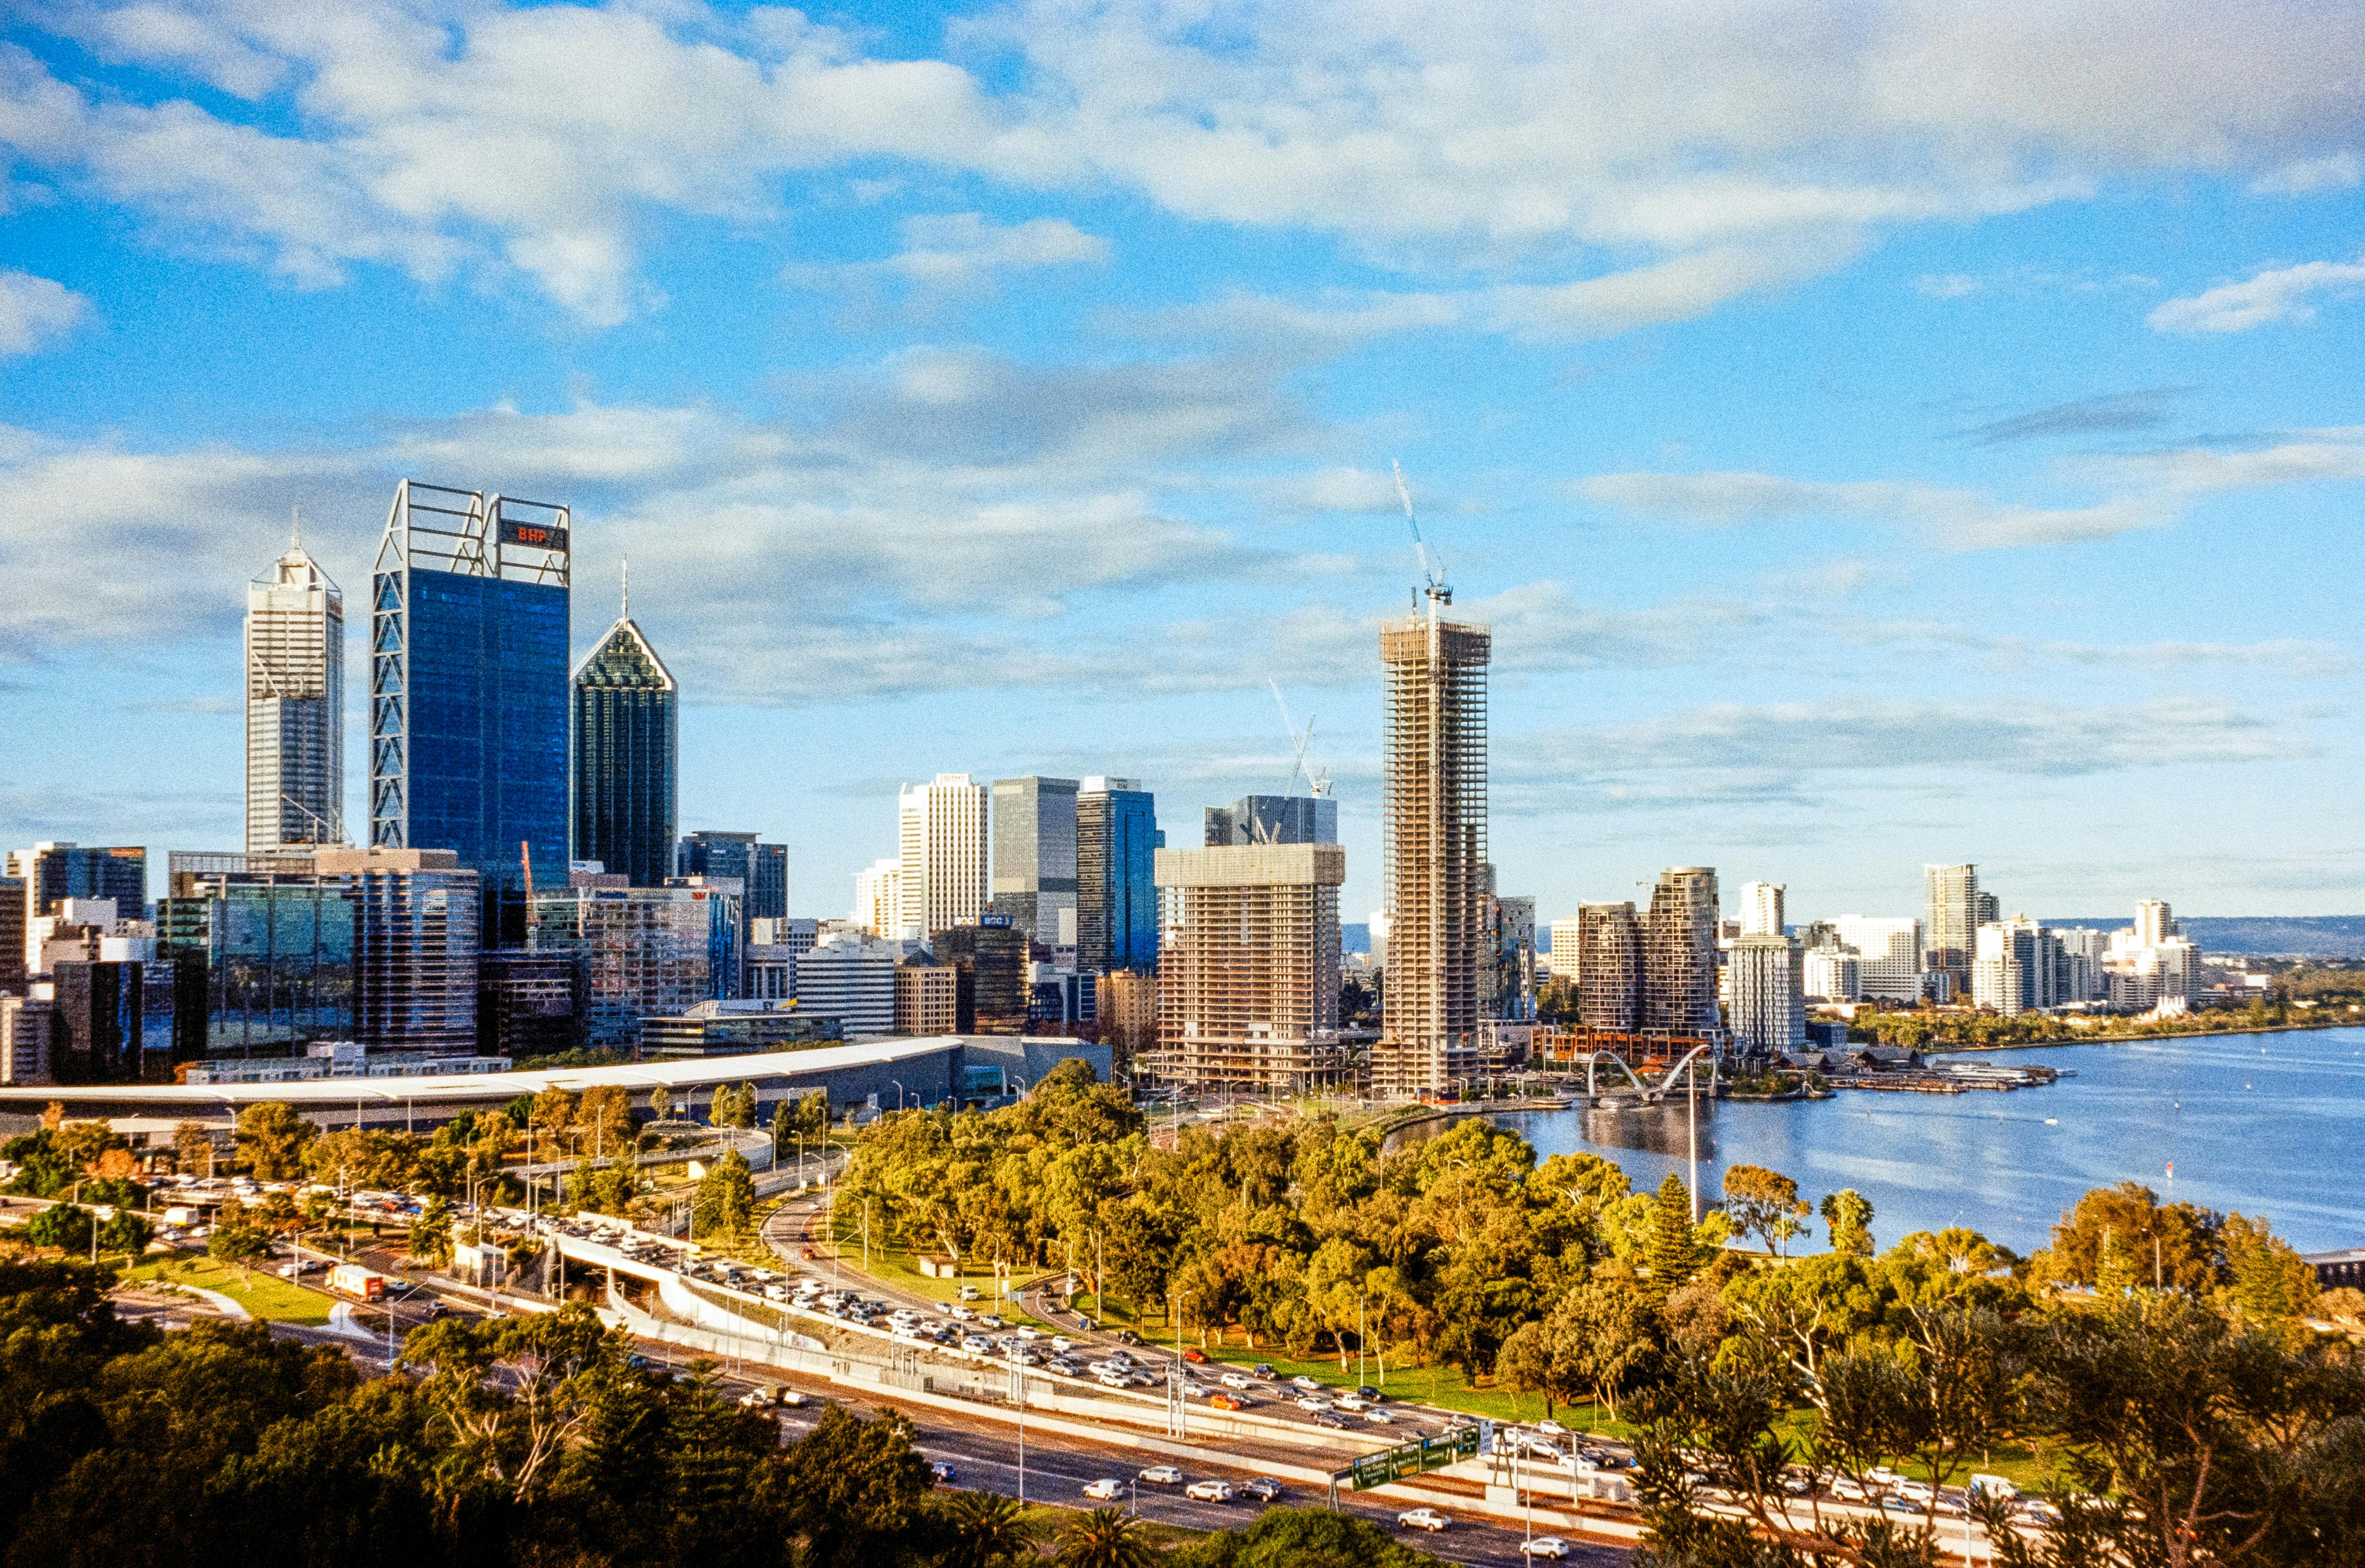 Expert shares 10 tips for finding the best building lots in booming Perth market